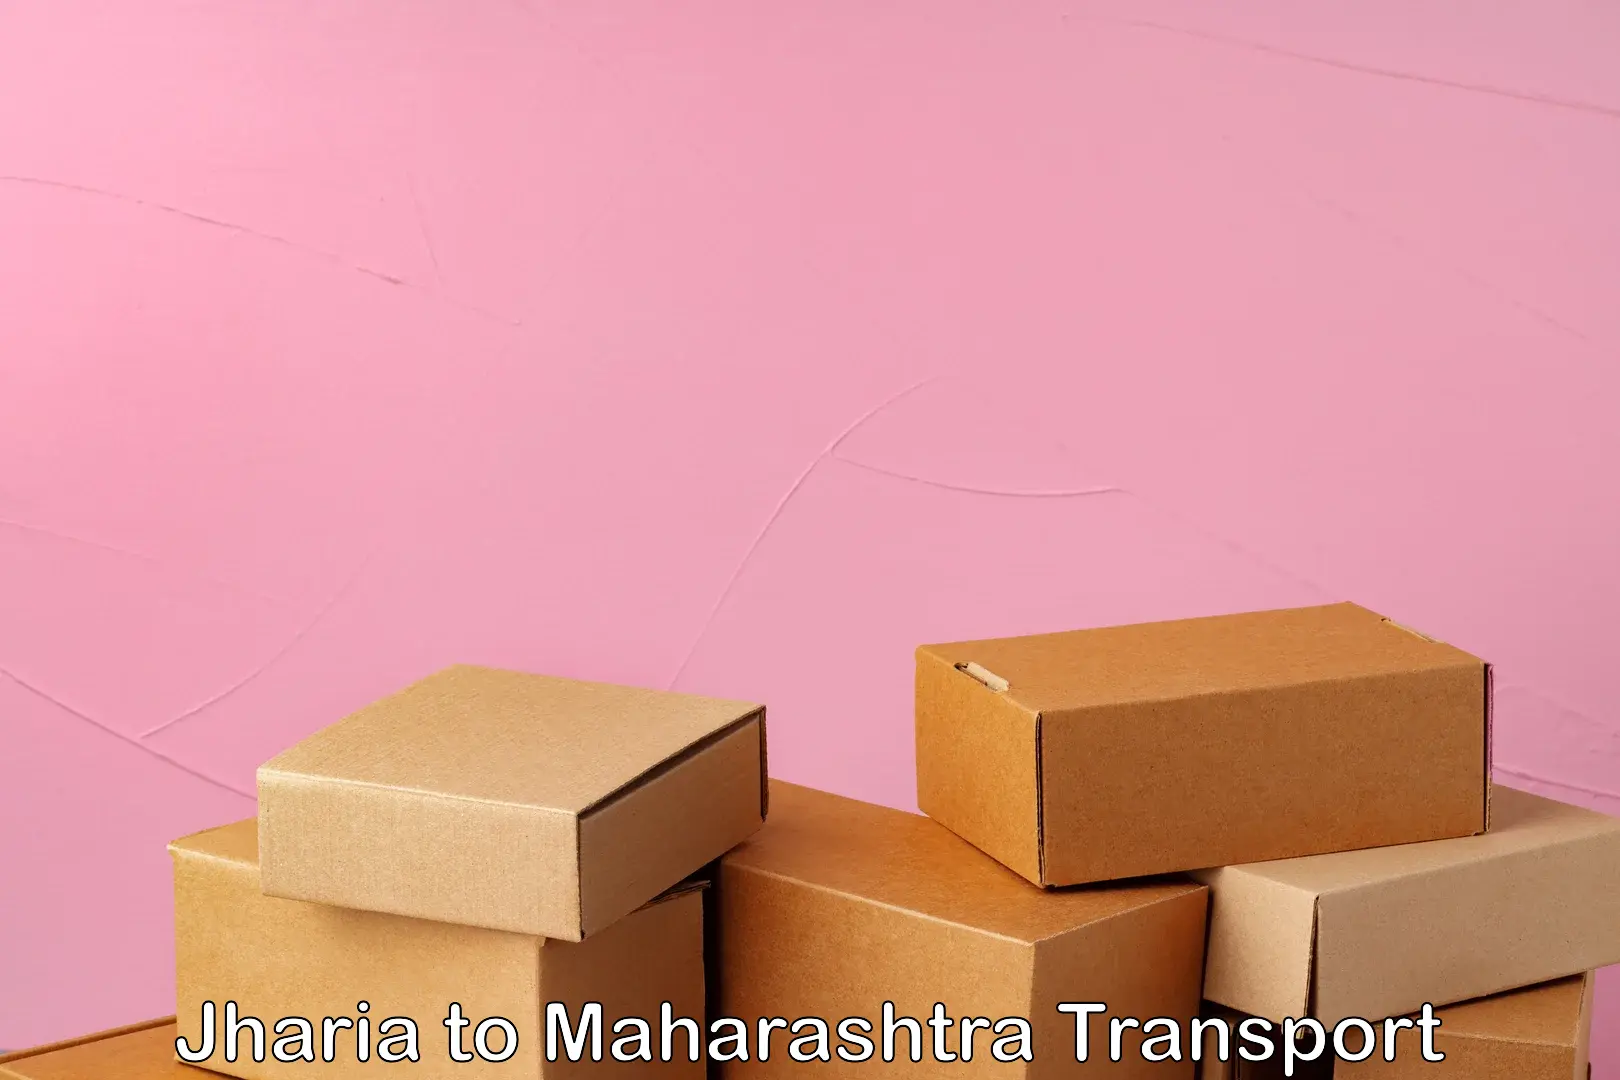 Truck transport companies in India Jharia to Digras